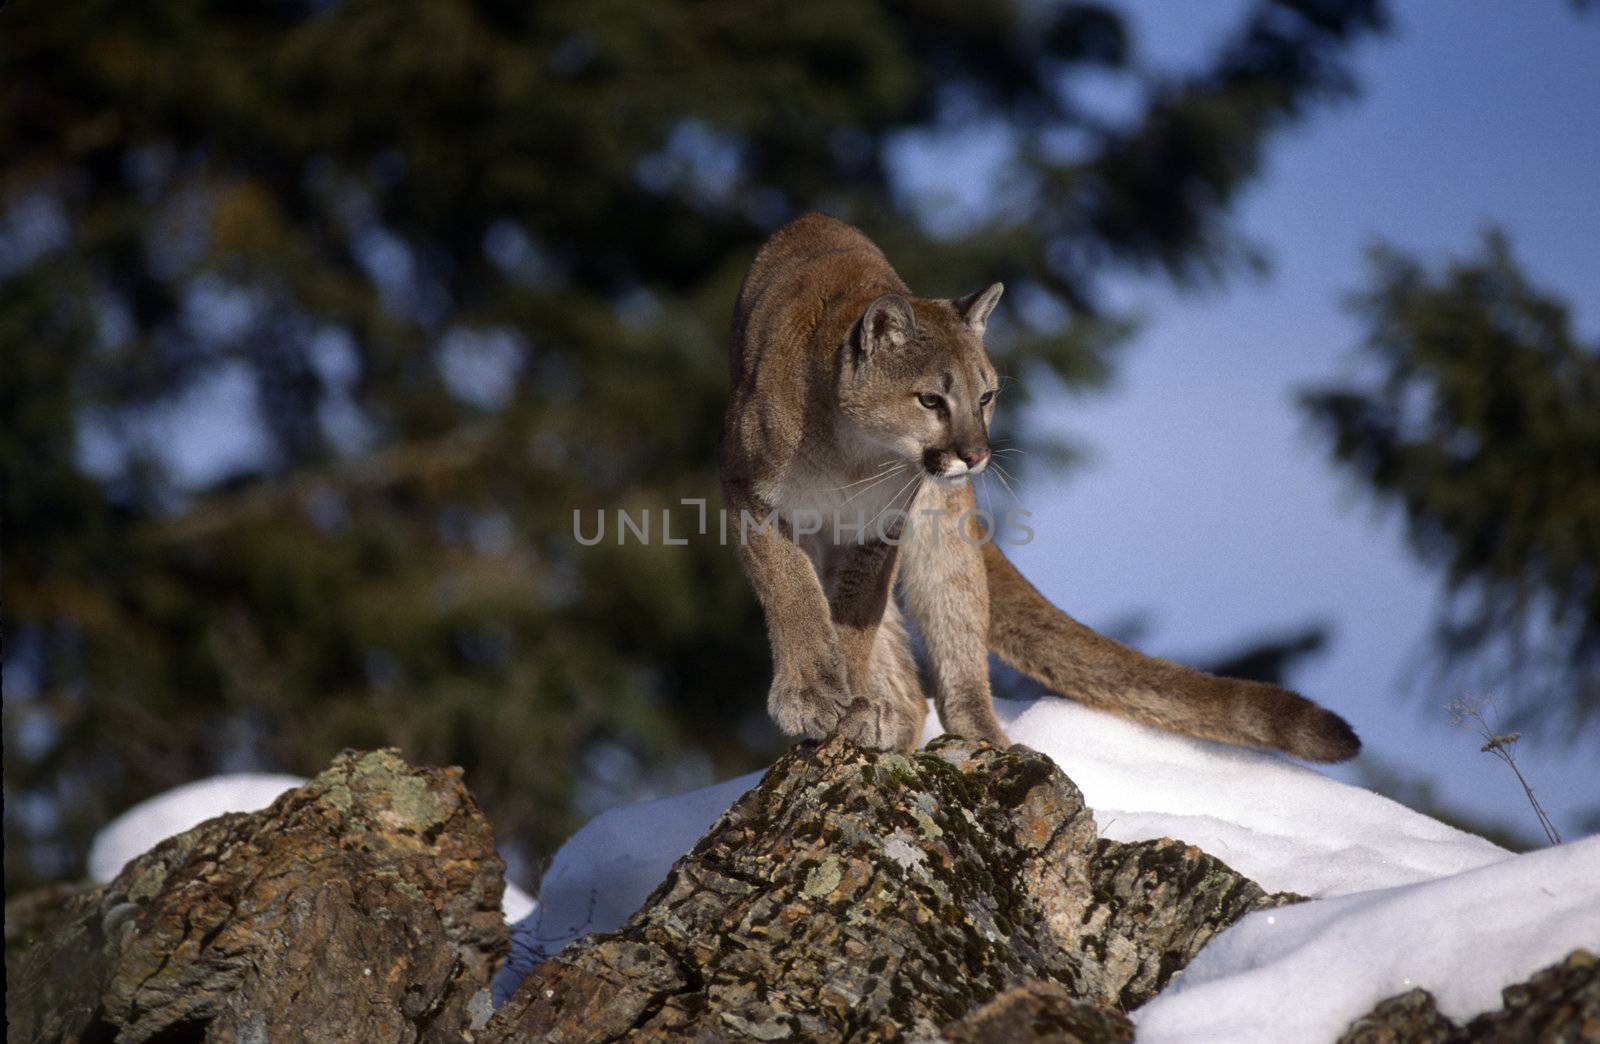 Adult Mountain Lion crouched looking for prety.